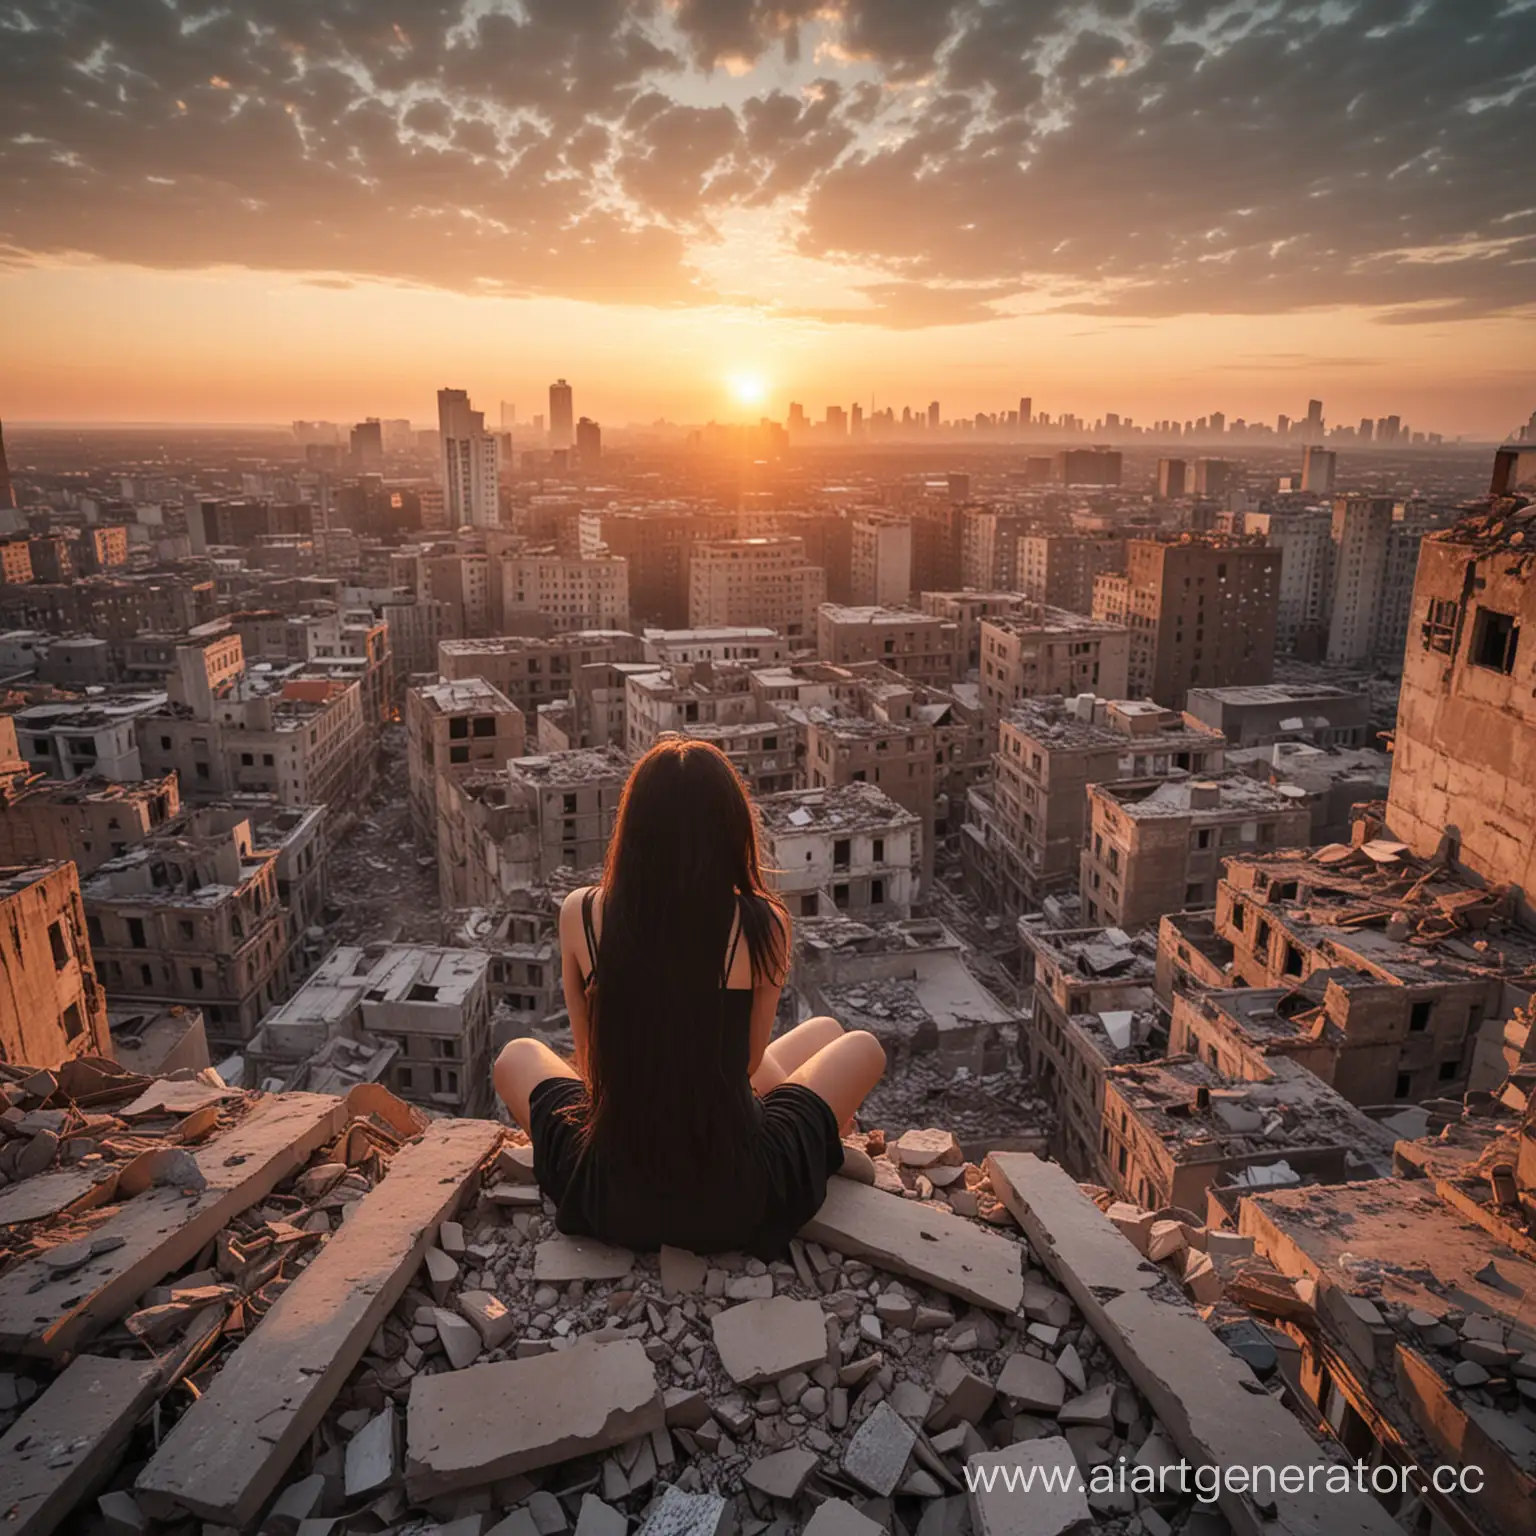 Lonely-Girl-Contemplating-Sunset-in-Abandoned-City